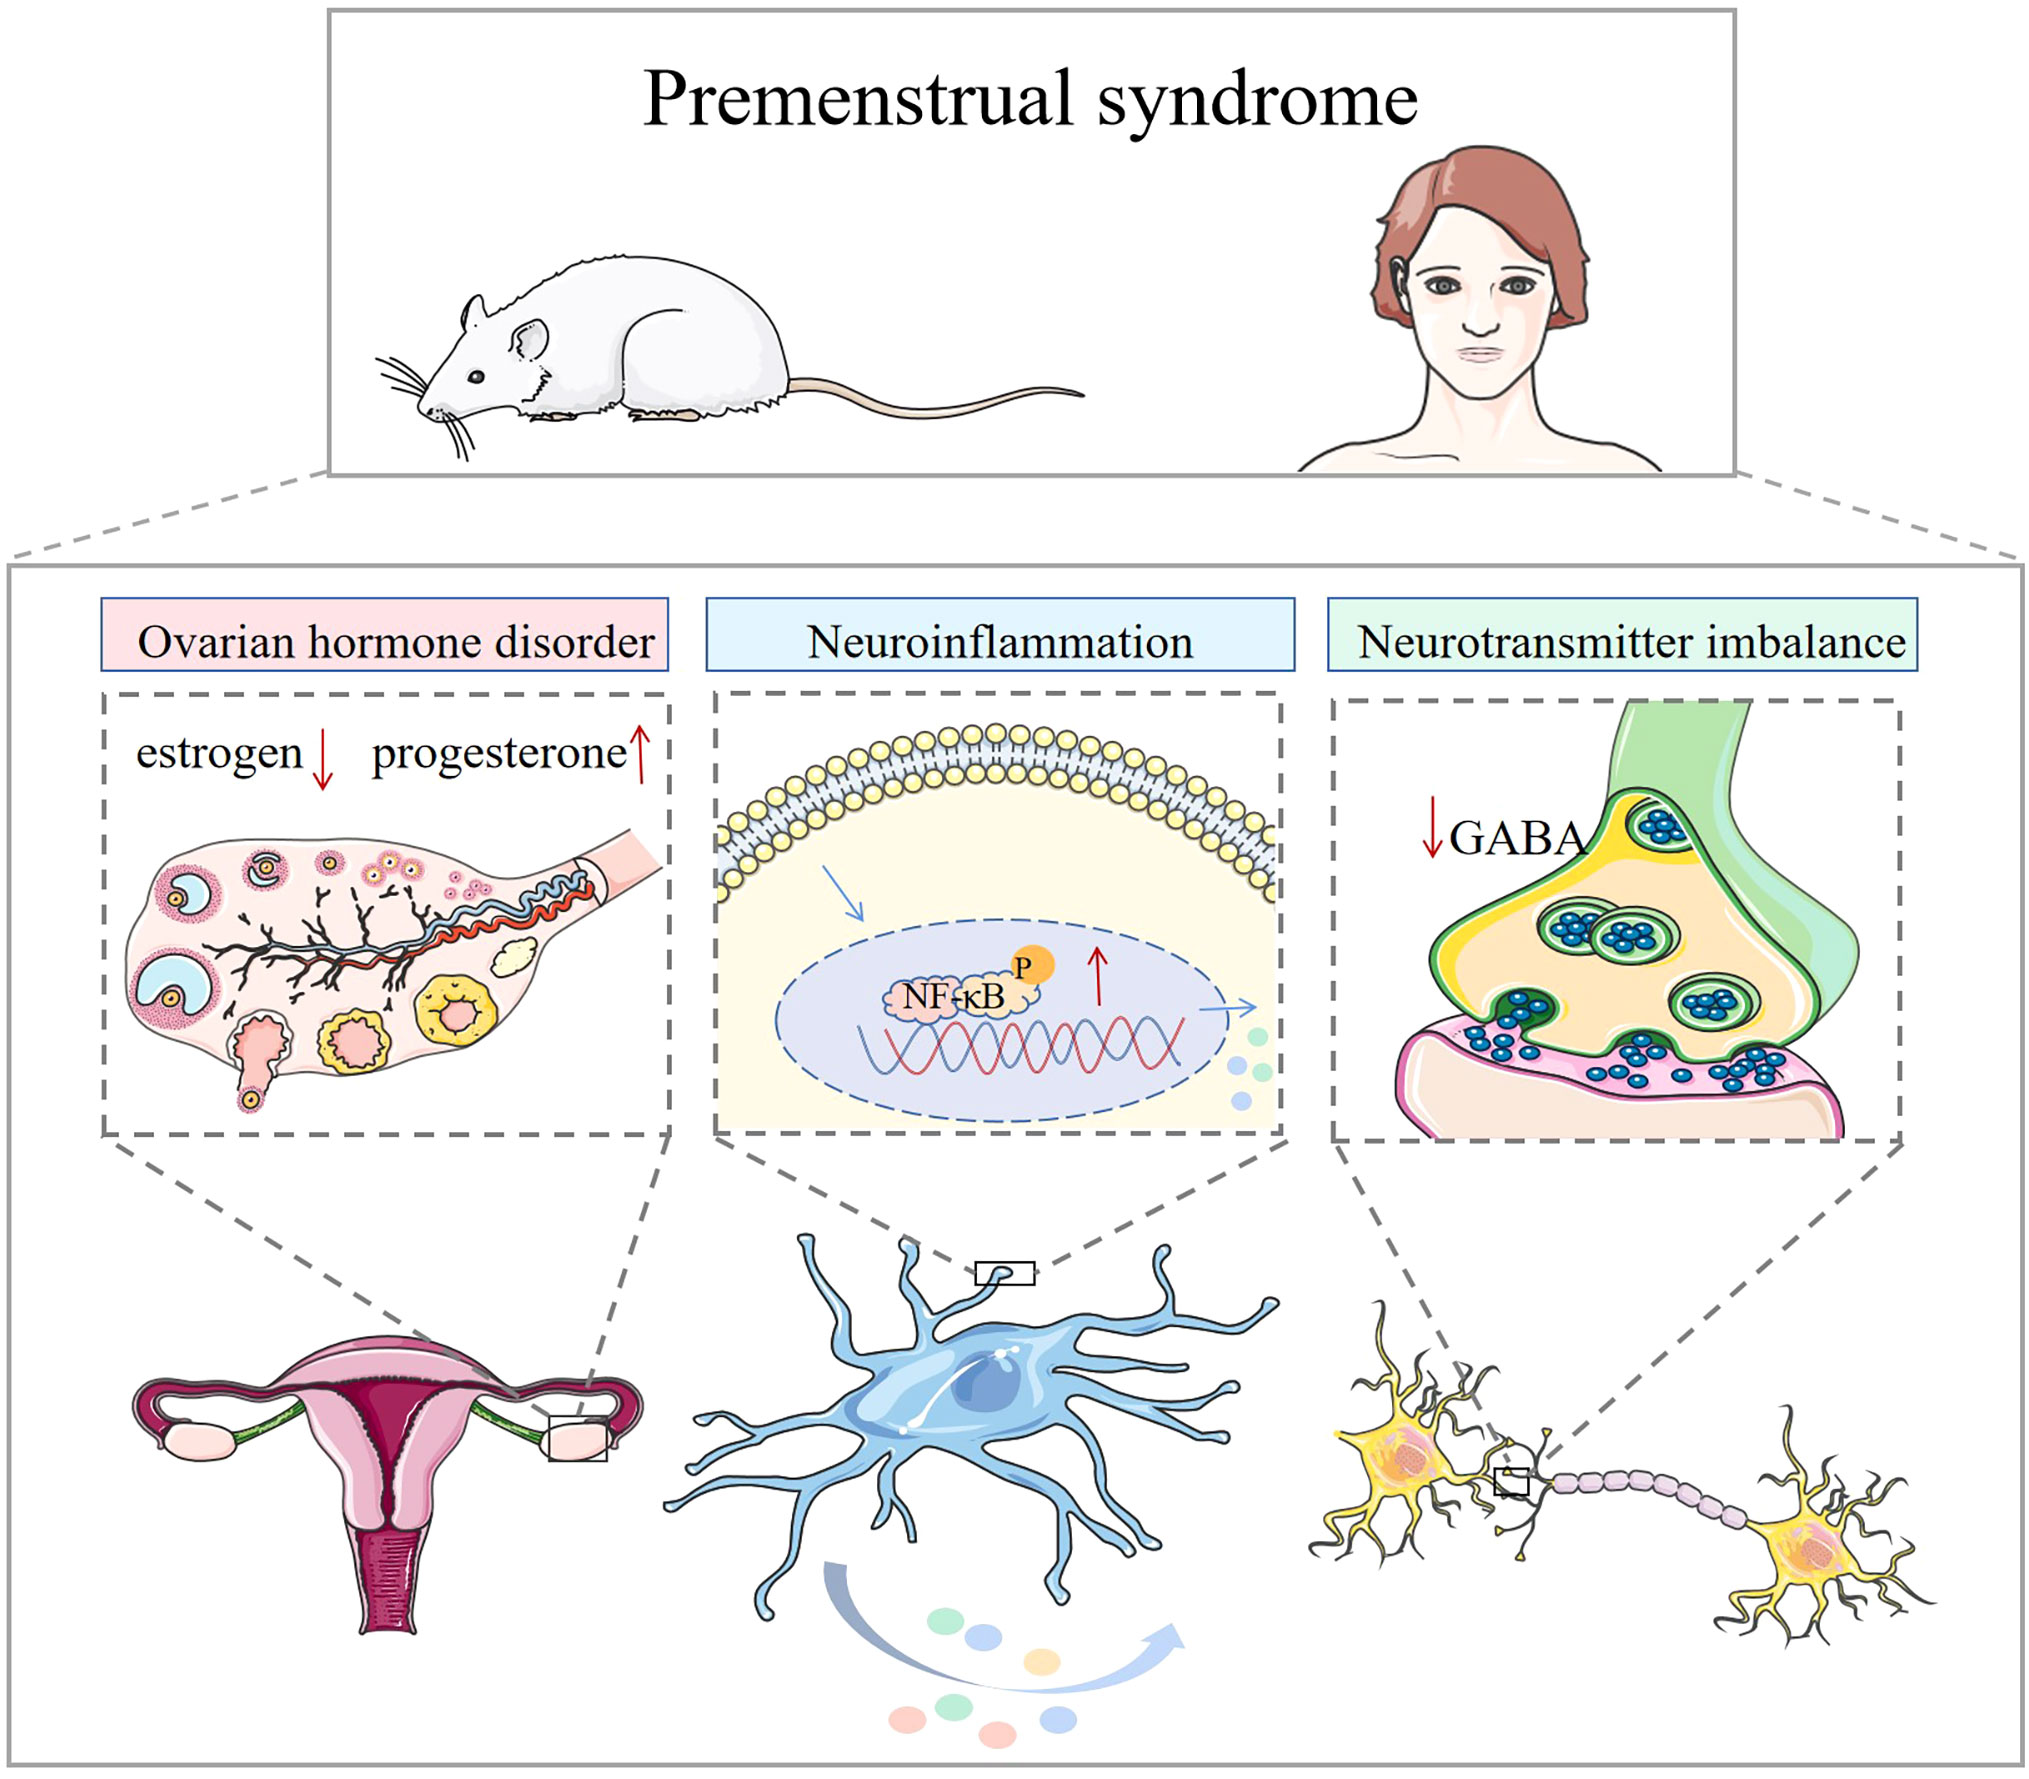 Aetiology, Diagnosis and Management of Premenstrual Syndrome